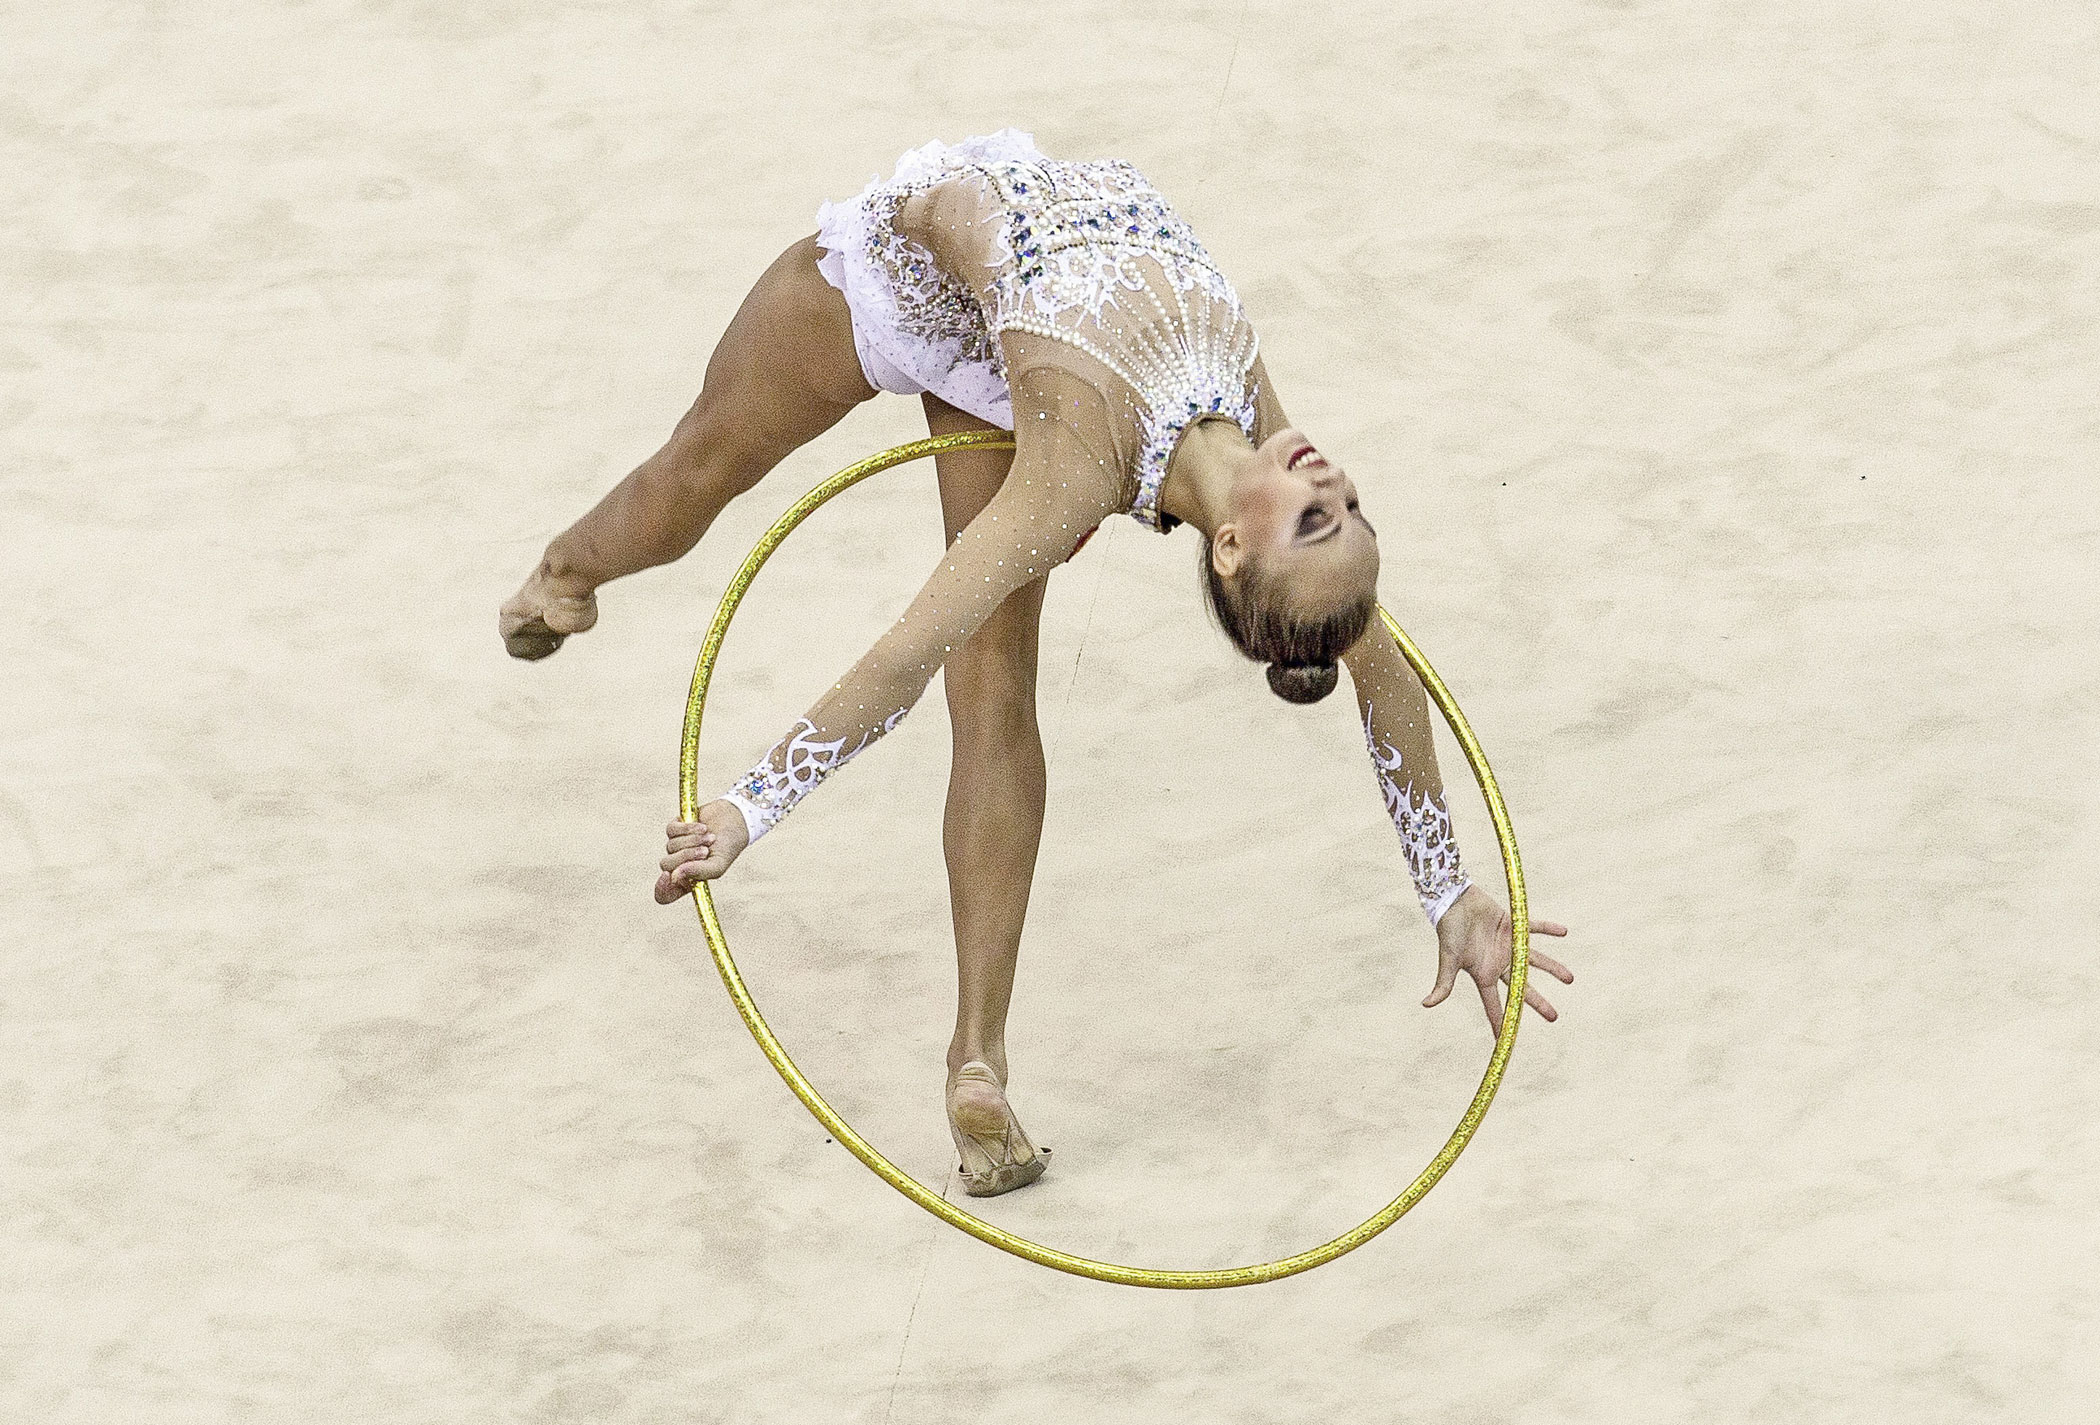 Irina Annenkova of Russia competes in Rhythmic Gymnastics Individual All-Around Qualification on day ten of the Nanjing 2014 Summer Youth Olympic Games at Nanjing OSC Gymnasium on Aug. 26, 2014 in Nanjing.